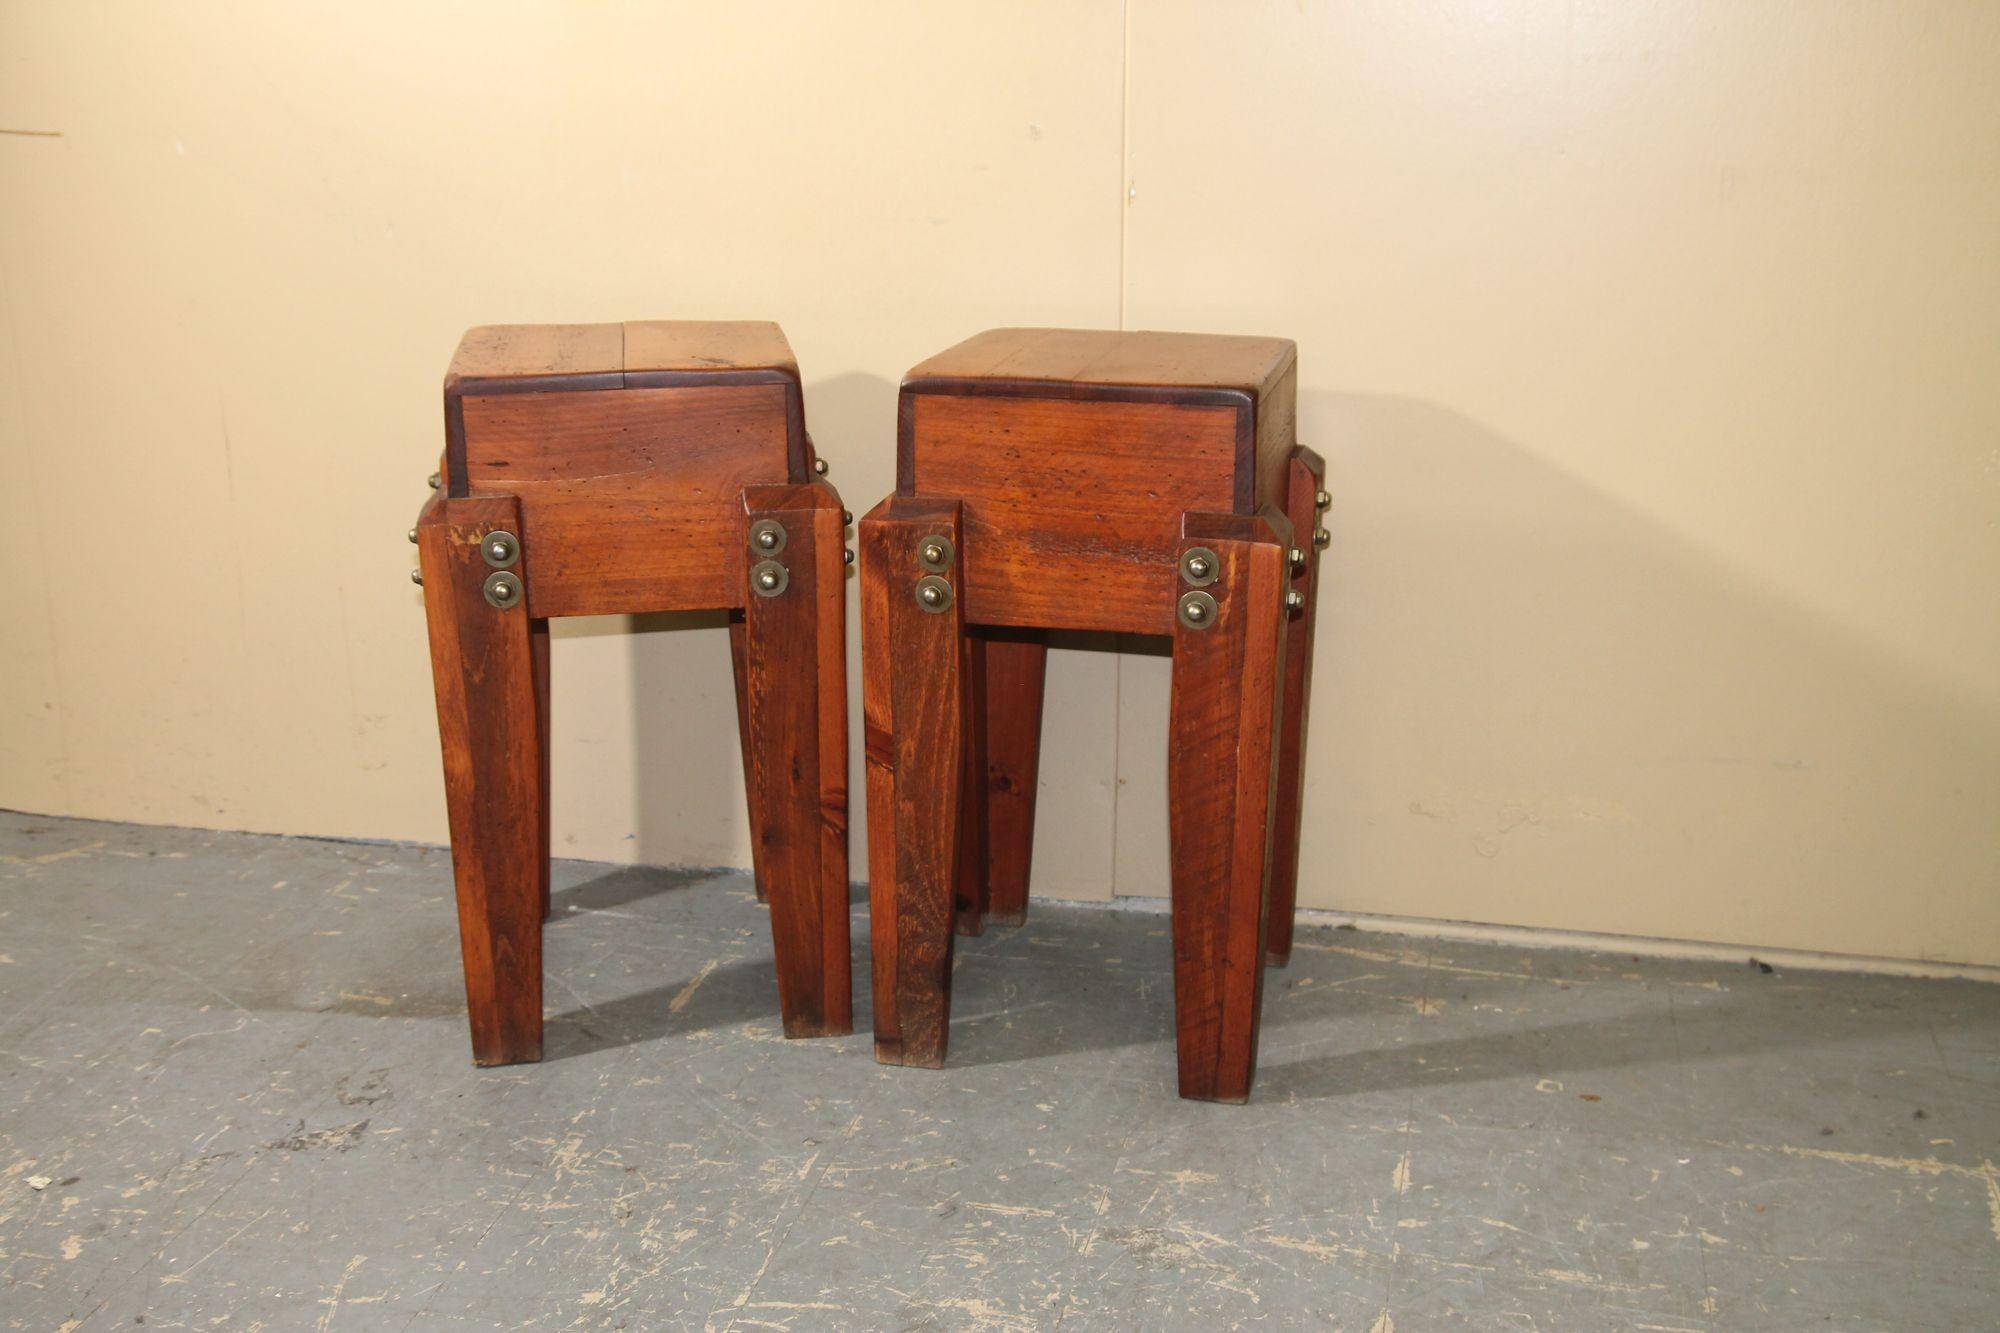 Great pair of vintage craftsman made side table. These tables are estimated to be roughly 50 years old and will go nicely with any decor you choose to use them in.